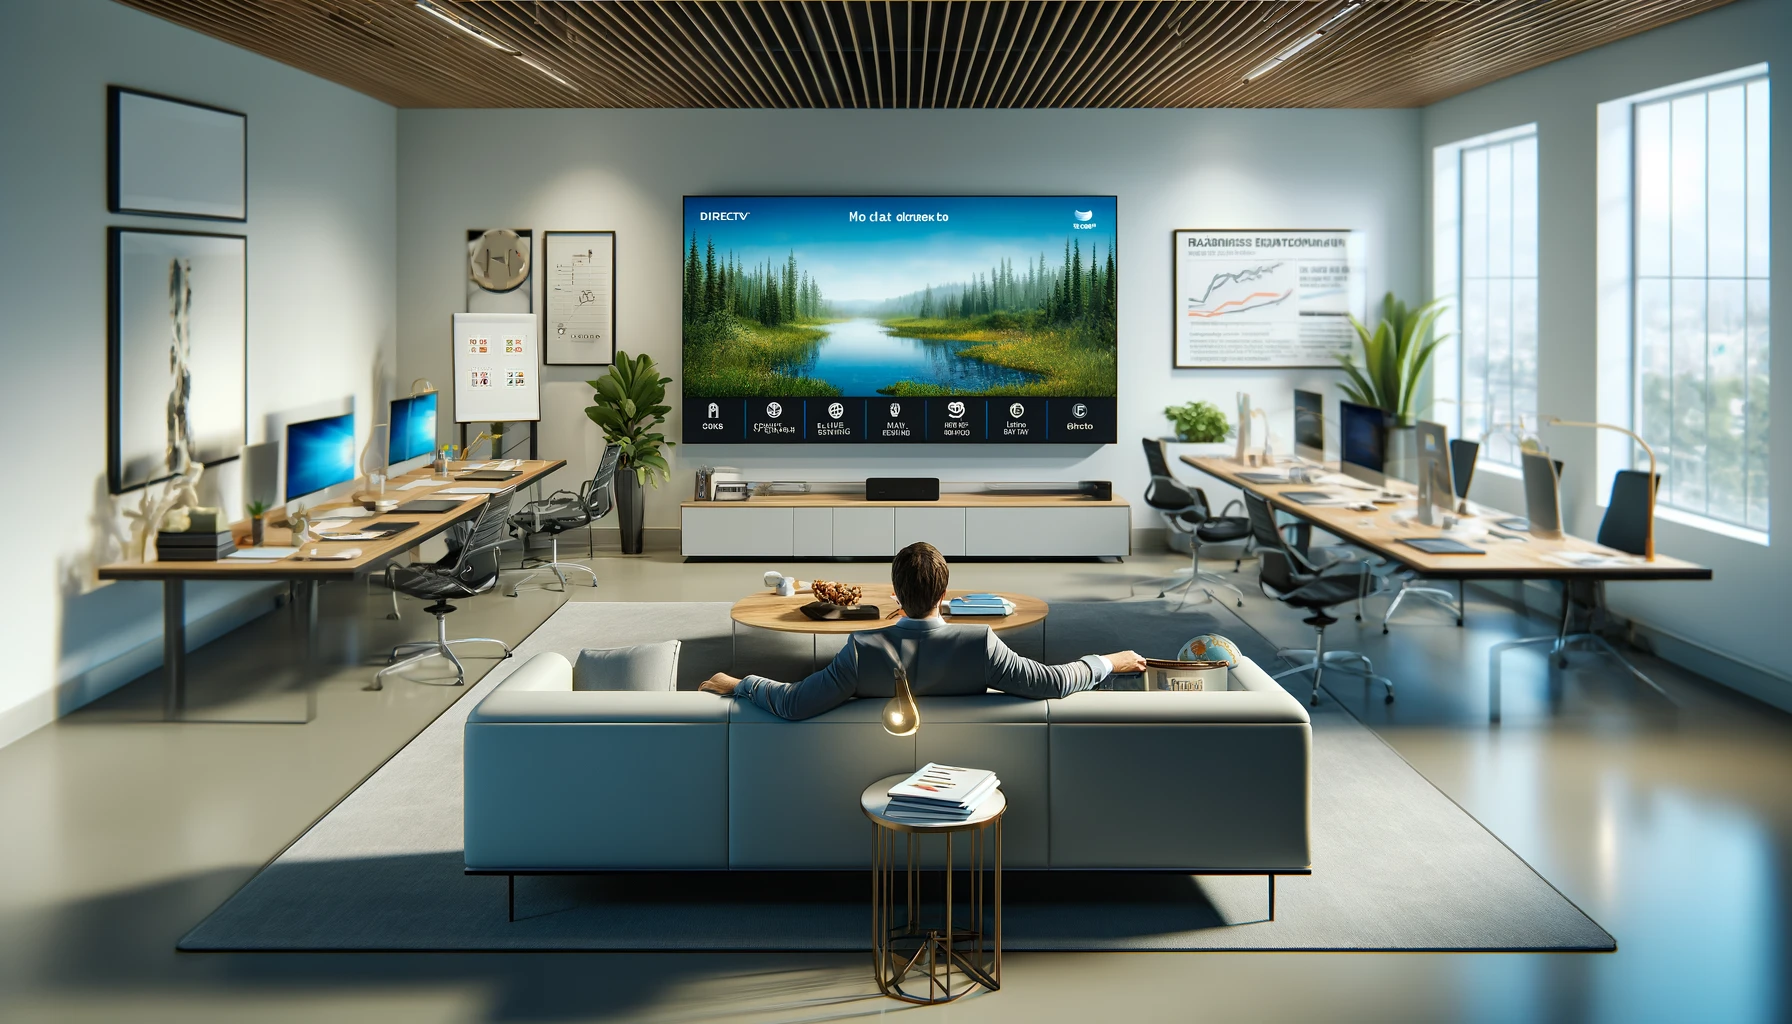 Modern private office with comfortable seating and workstations. A wall-mounted TV shows a nature documentary and business news. An office worker relaxes on the couch.